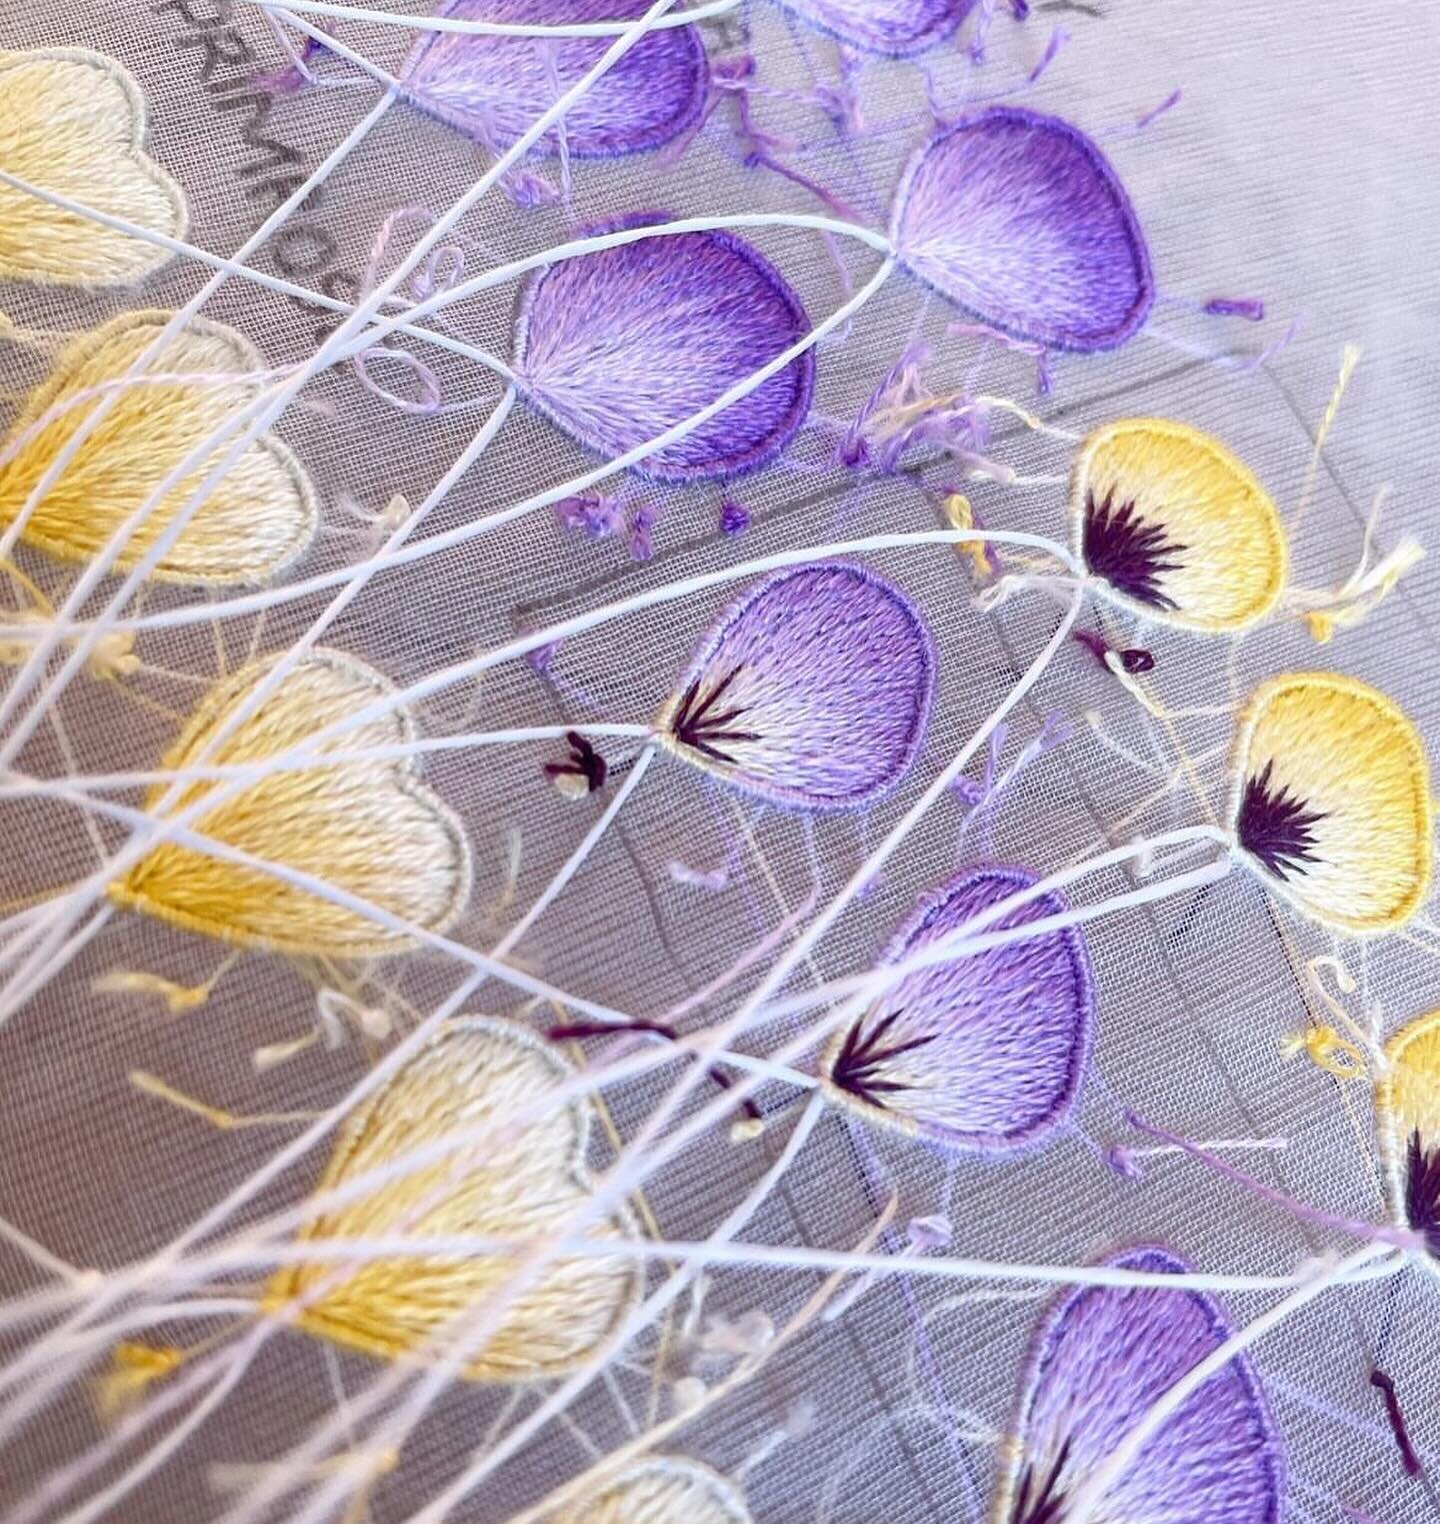 Petals in progress 💜💛

I love the process of stitching tiny spring flowers. The beautiful blend from pale yellow to lilac is so synonymous with the season 💜

These petals form part of the Tranquillity Posy kit restocking on 1st April 💛

Make sure